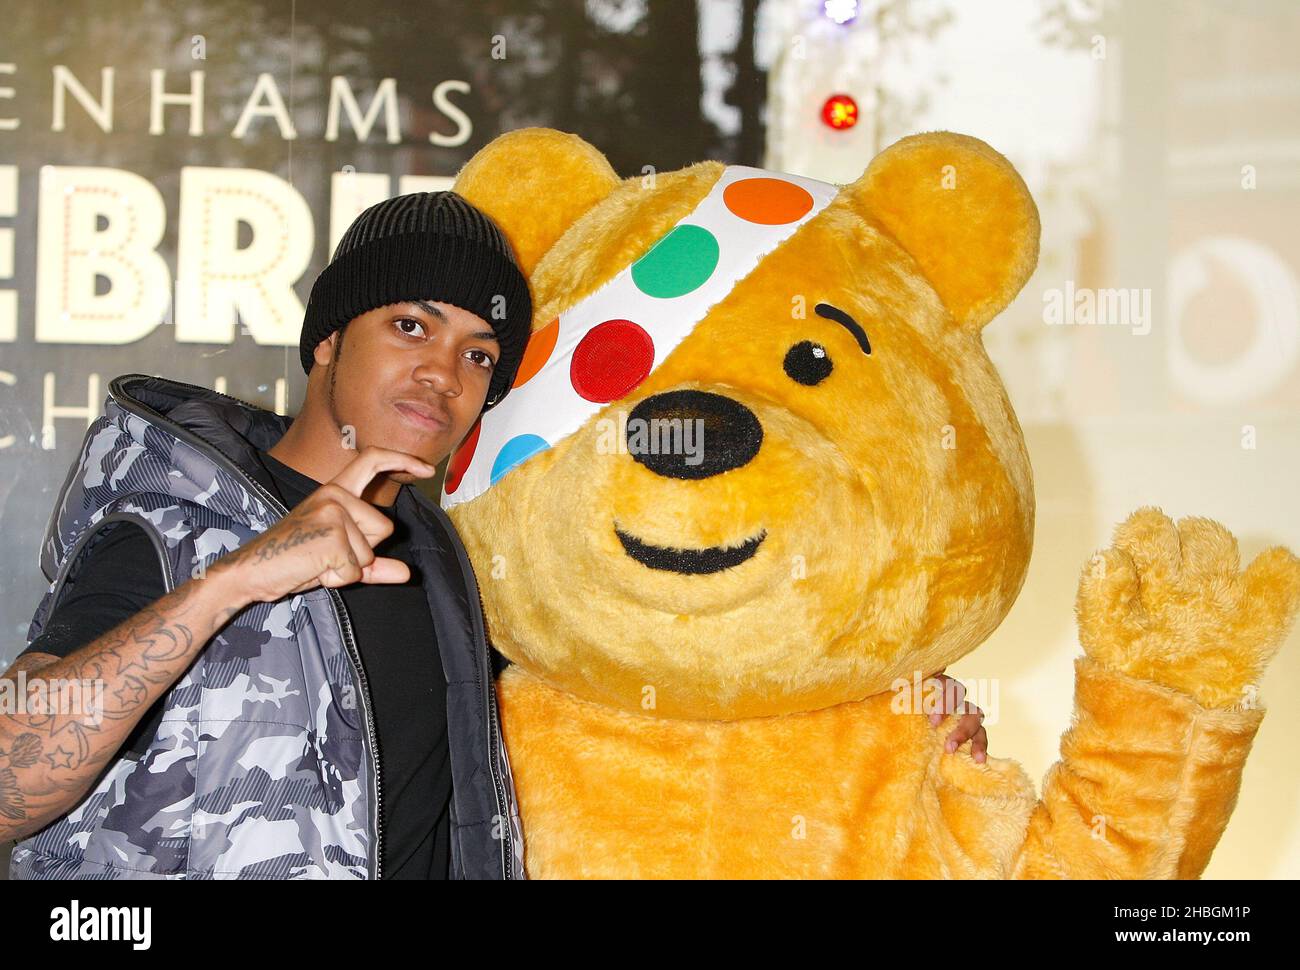 Chipmunk celebrates the launch of the BBC Children in Need Celebrity Style Challenge in association with Debenhams in the Oxford Street store window. The celebrities have designed a limited edition clothing collection to help raise money for BBC Children in Need. Stock Photo